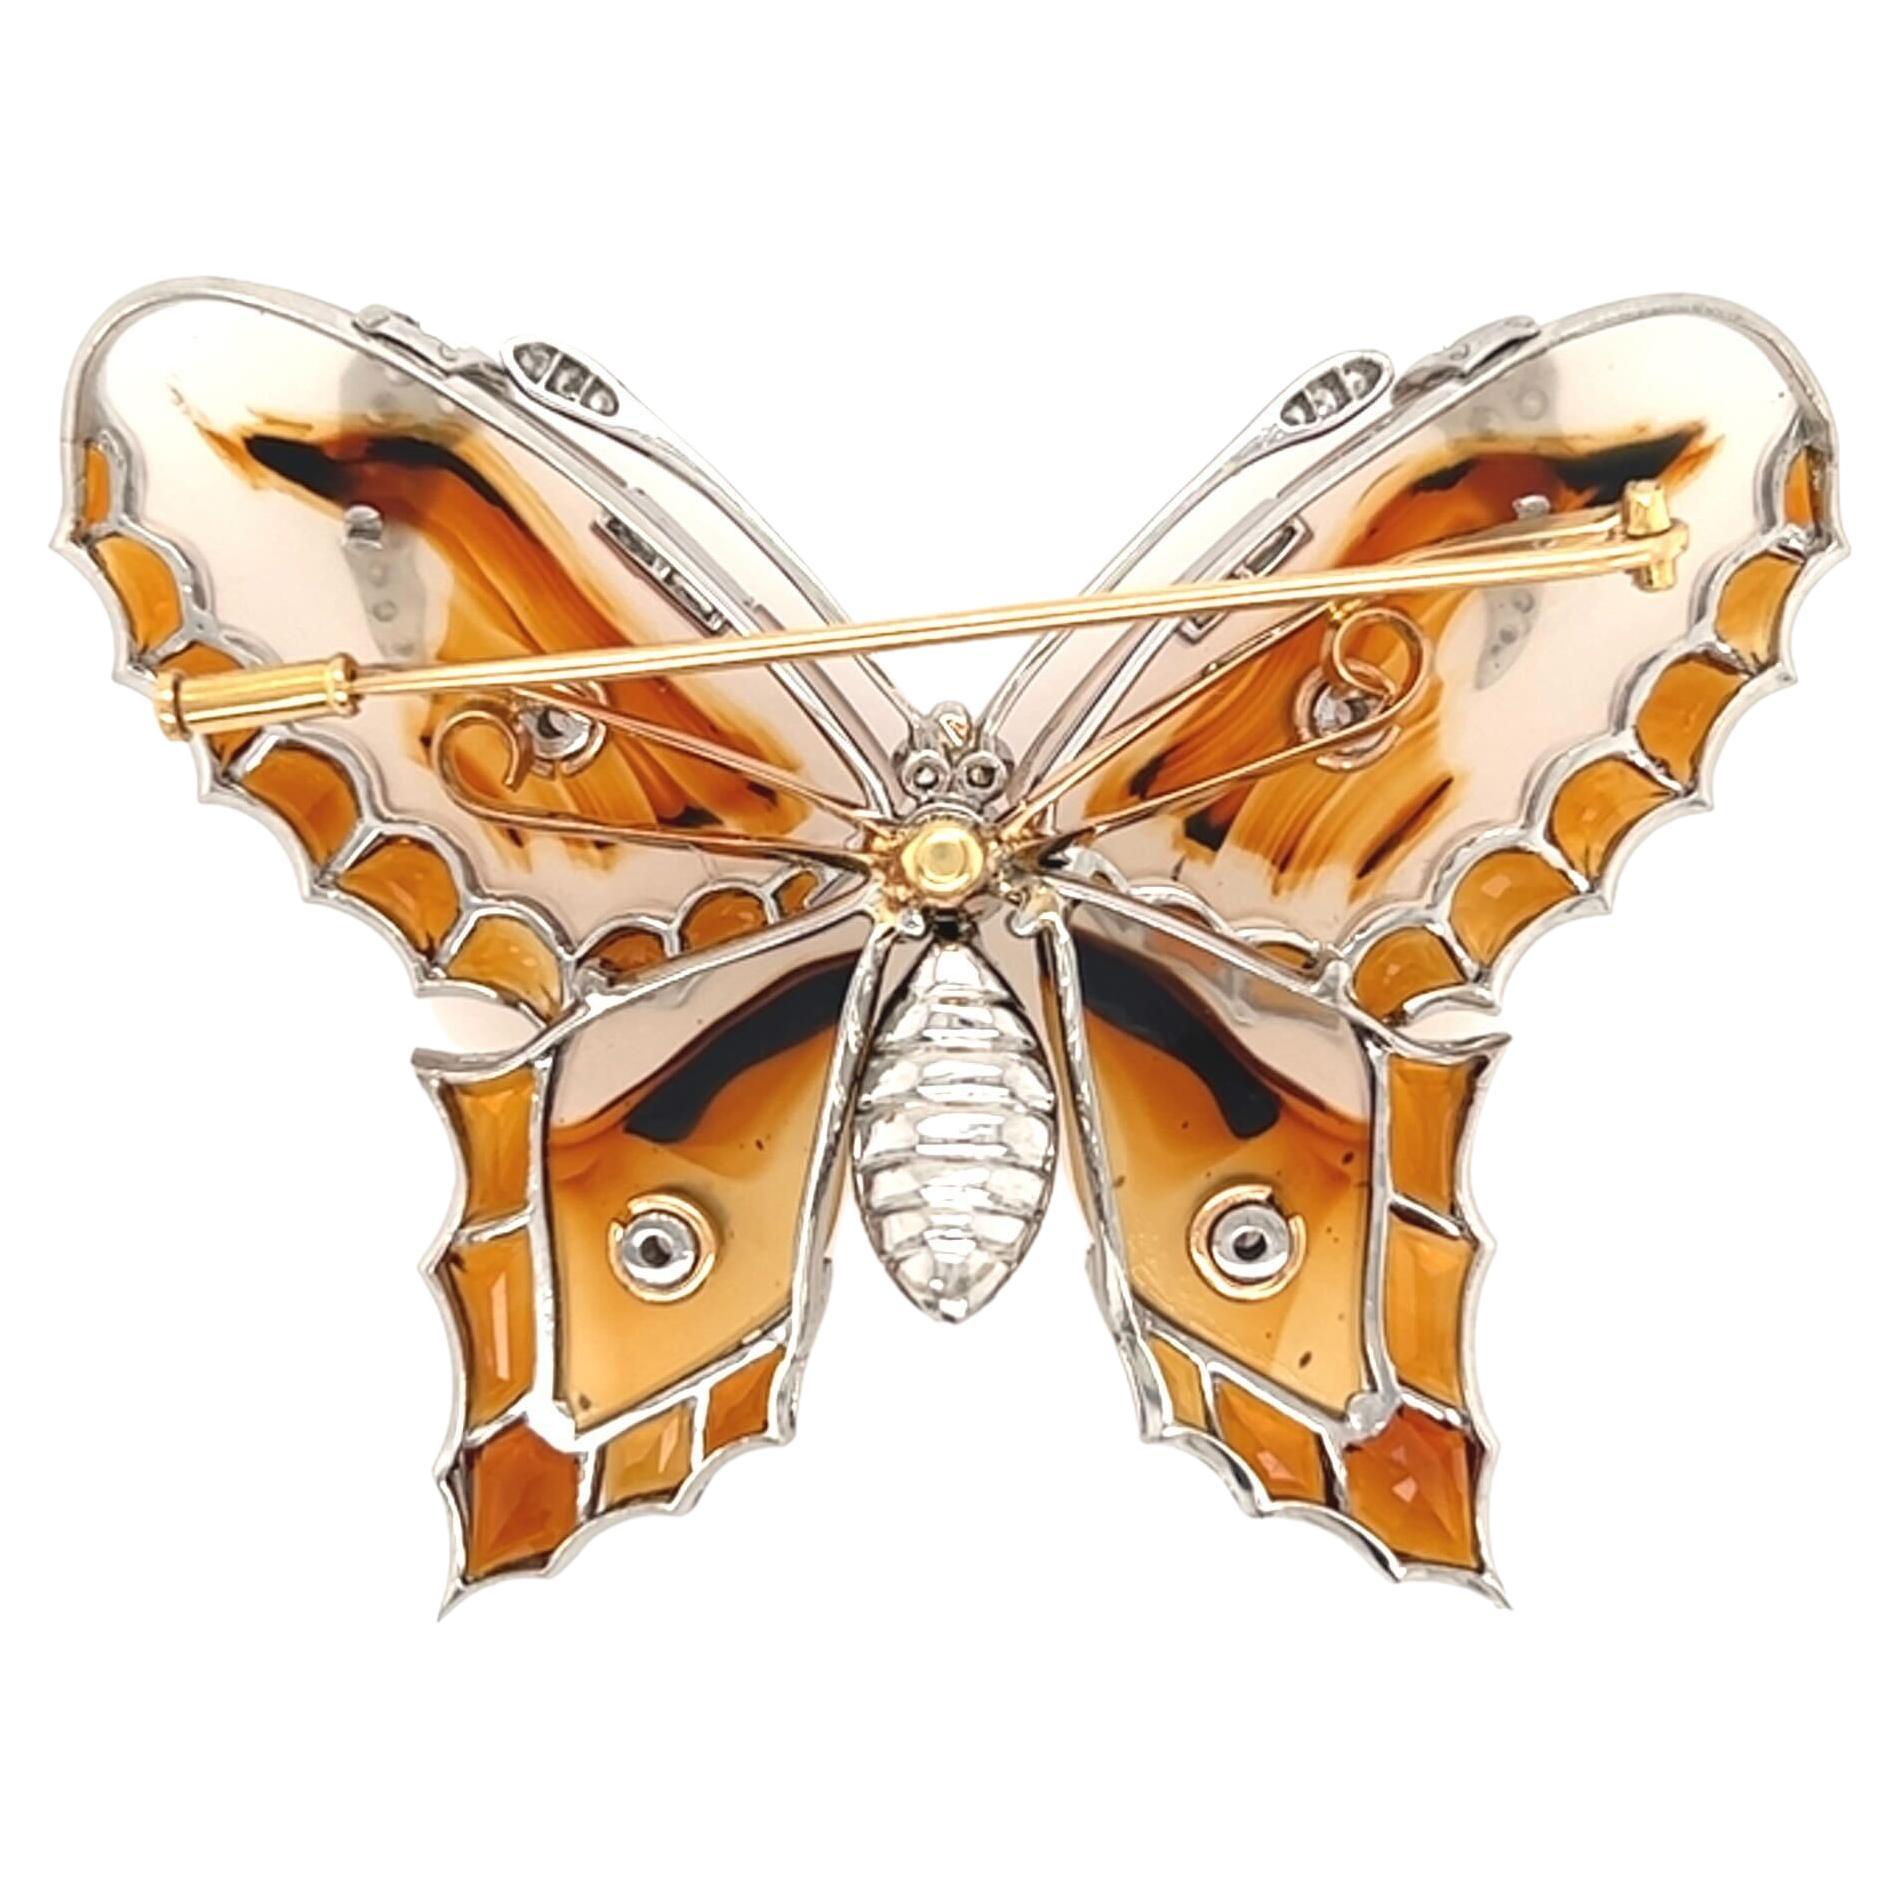 A platinum, 18 karat yellow gold, agate, citrine and diamond brooch, circa 1960s.  The brooch in the form of a butterfly with carved wings of translucent agate with brownish orange markings set in platinum with calibre cut citrines outlining the